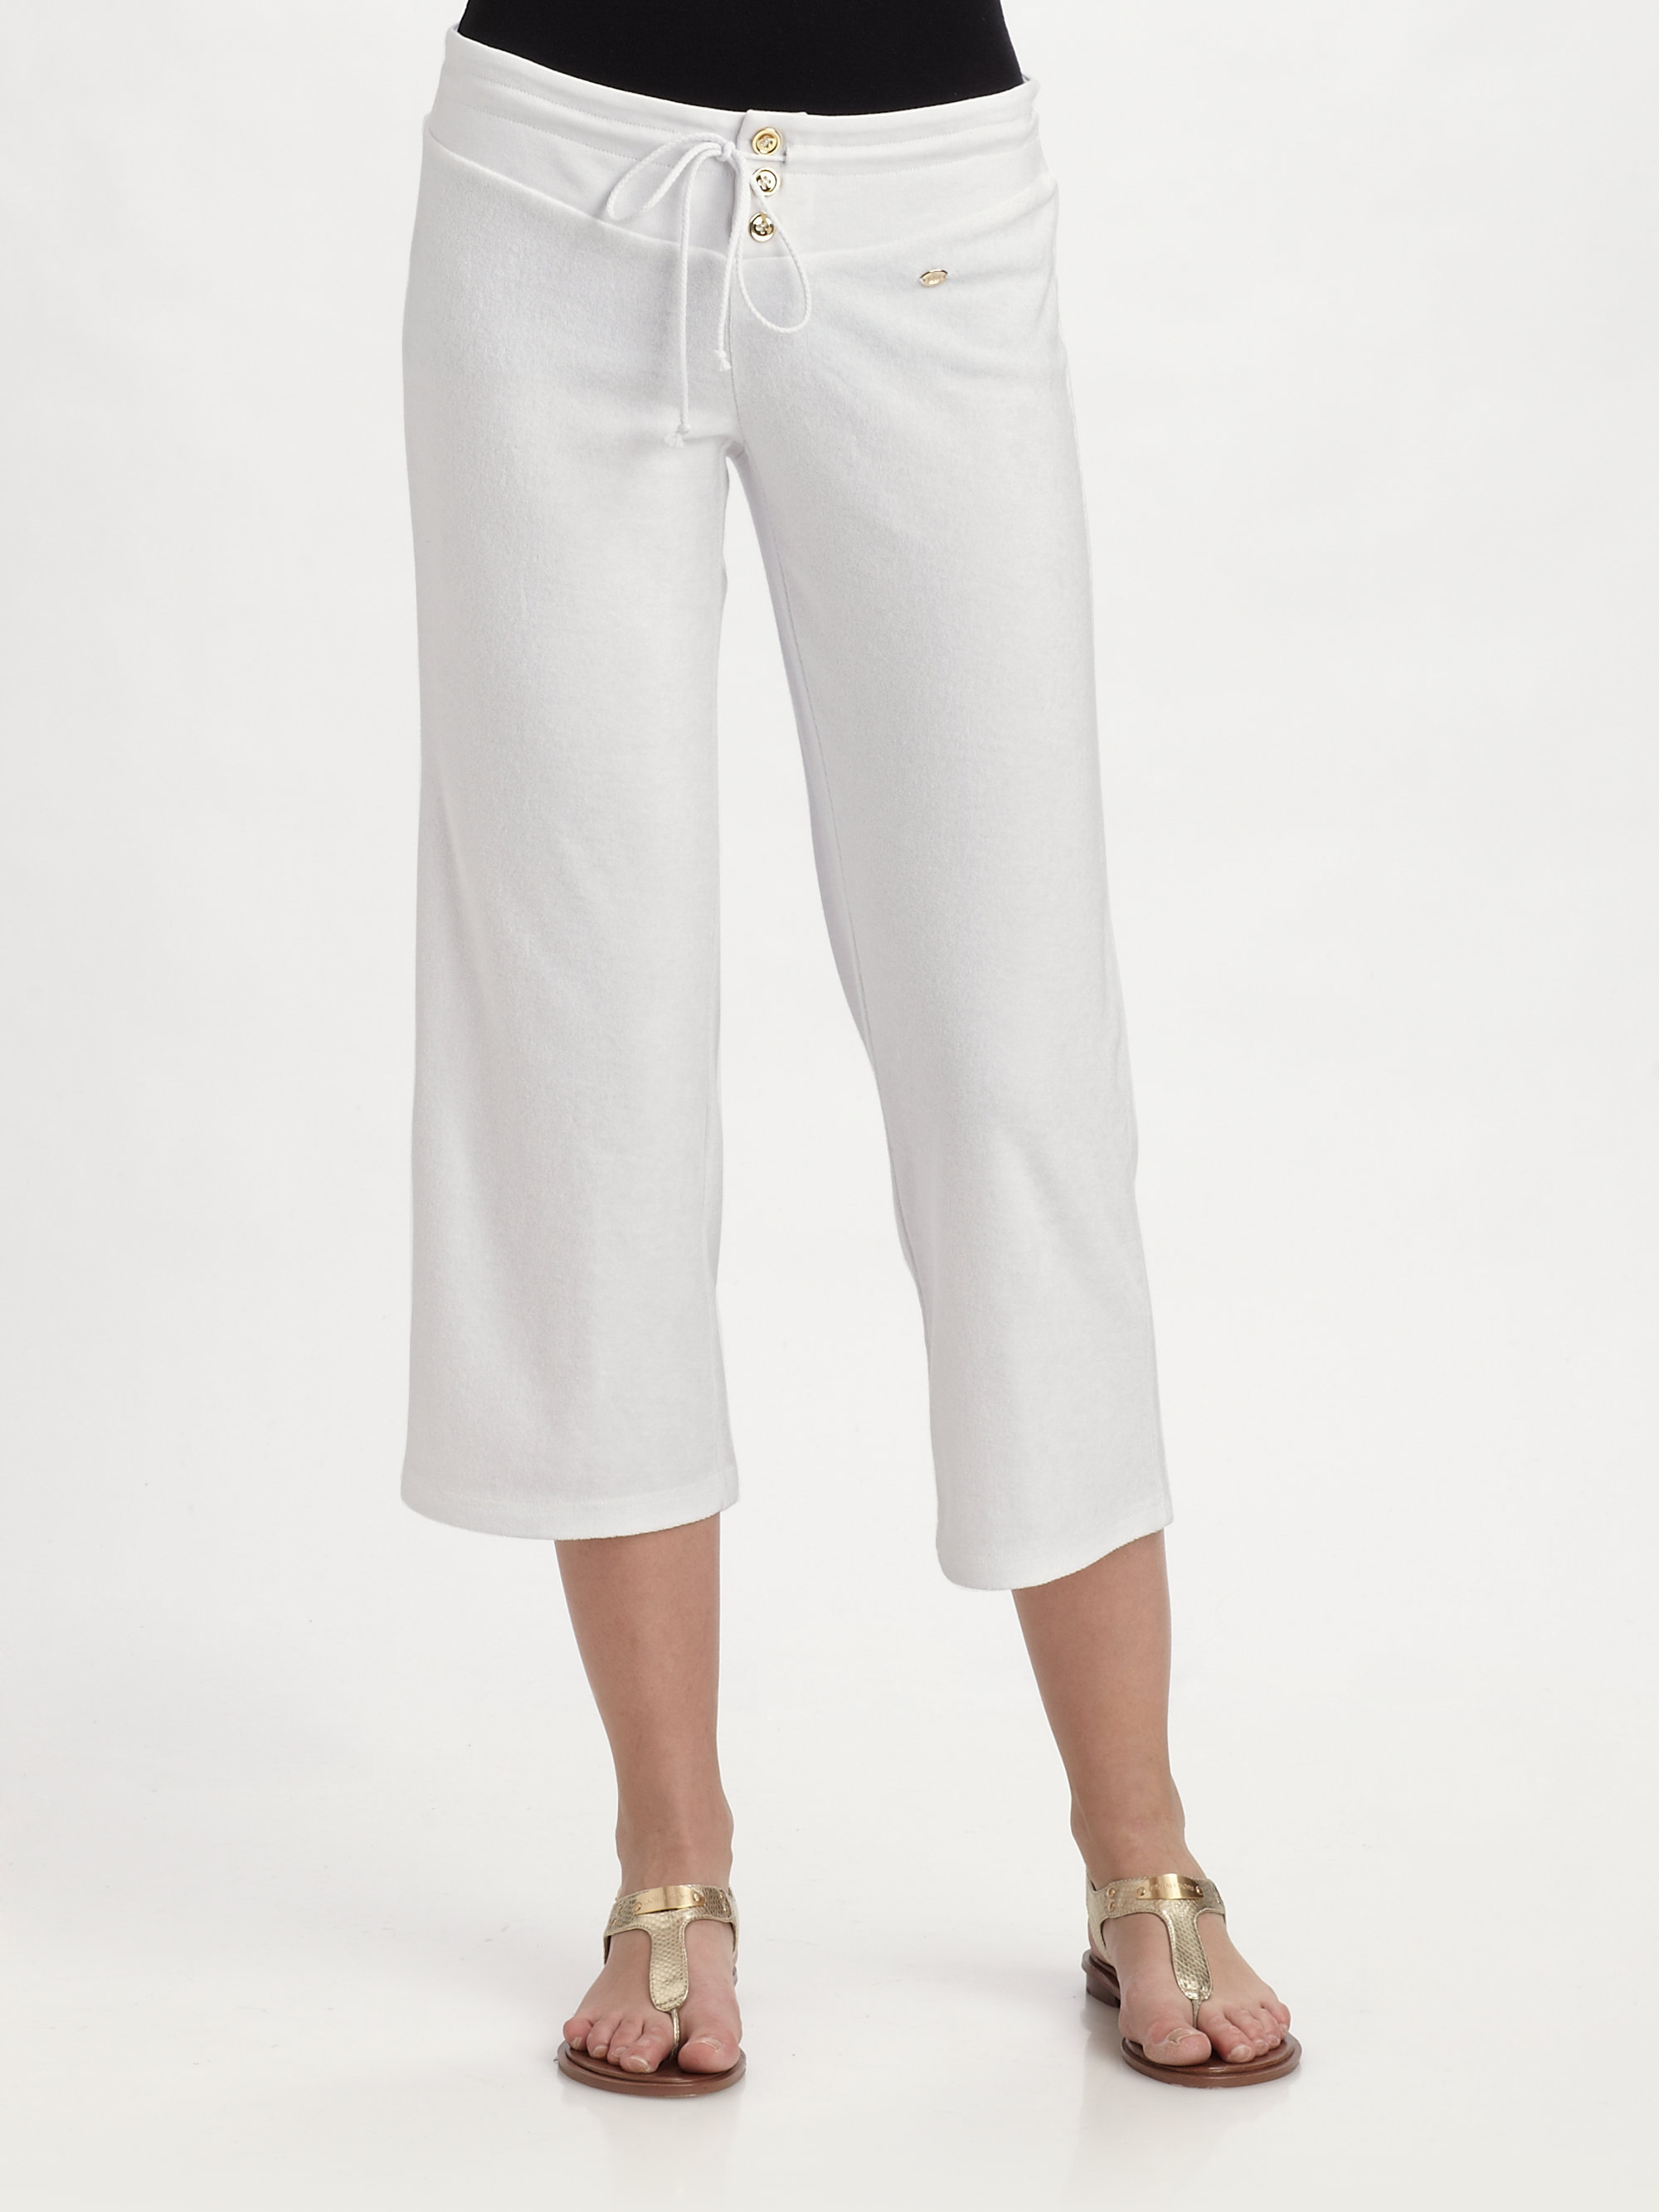 Juicy Couture Terry Cropped Pants in White | Lyst